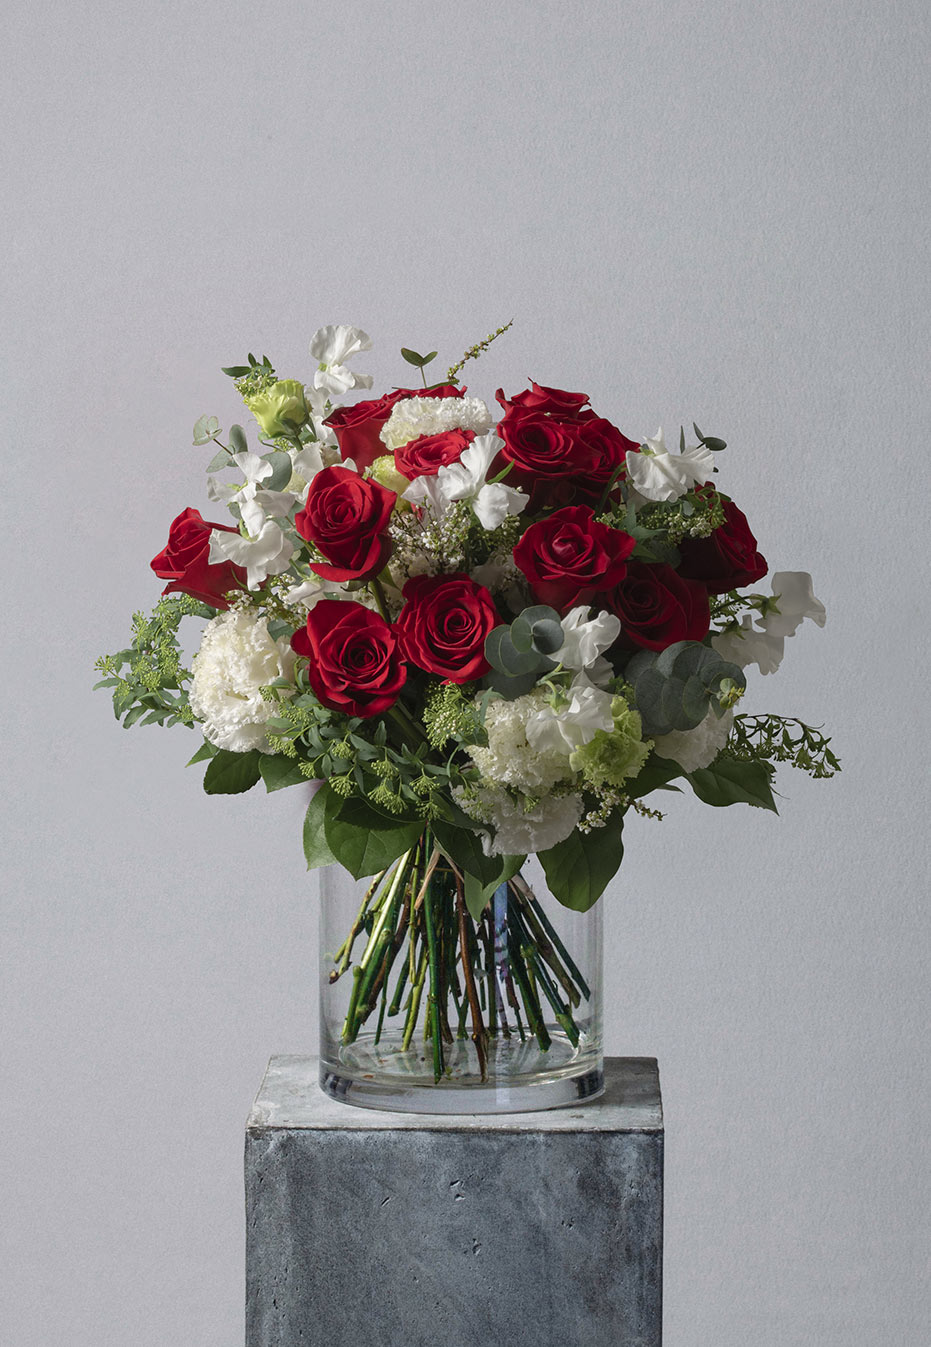  flower bouquet of red rose and sweet pea by flannel flowers